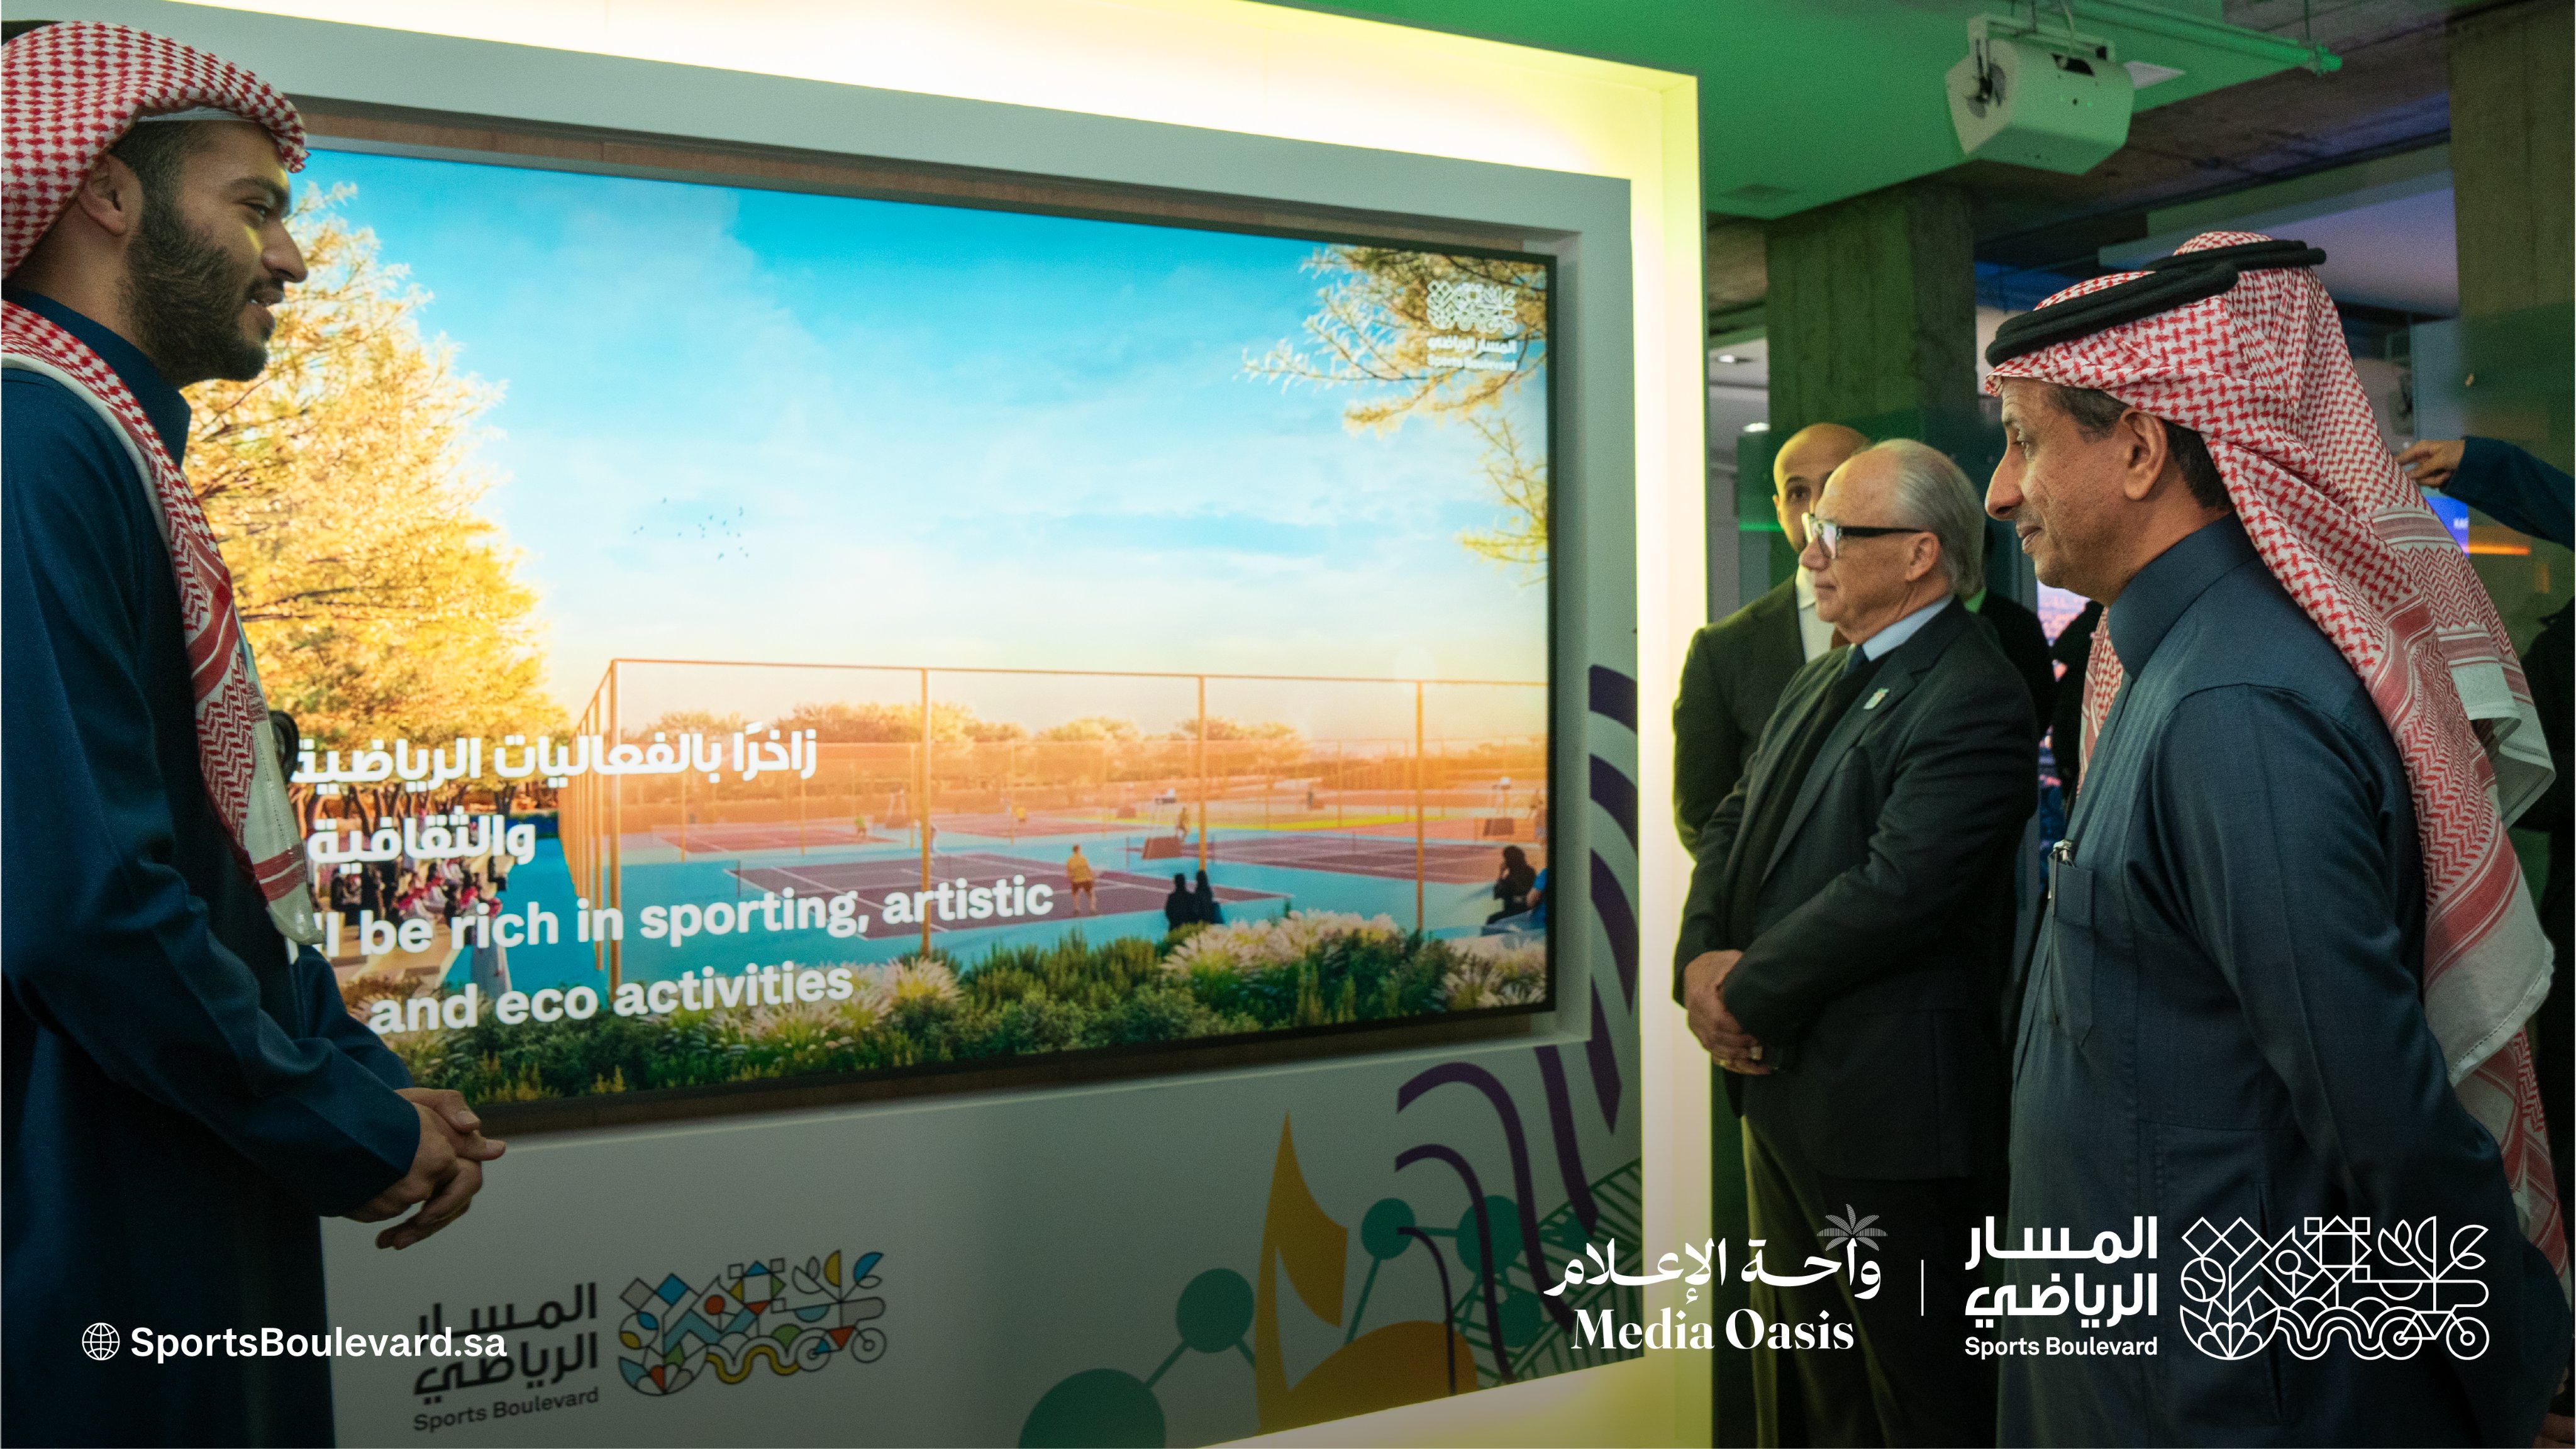 Inspirational day at #MediaOasis in Paris!
The #Sports_Boulevard proudly hosted Highnesses, Excellencies, and global guests, showcasing the phenomenal transformation taking place in #Riyadh.
We're on an exciting journey to enhance the quality of life for all!